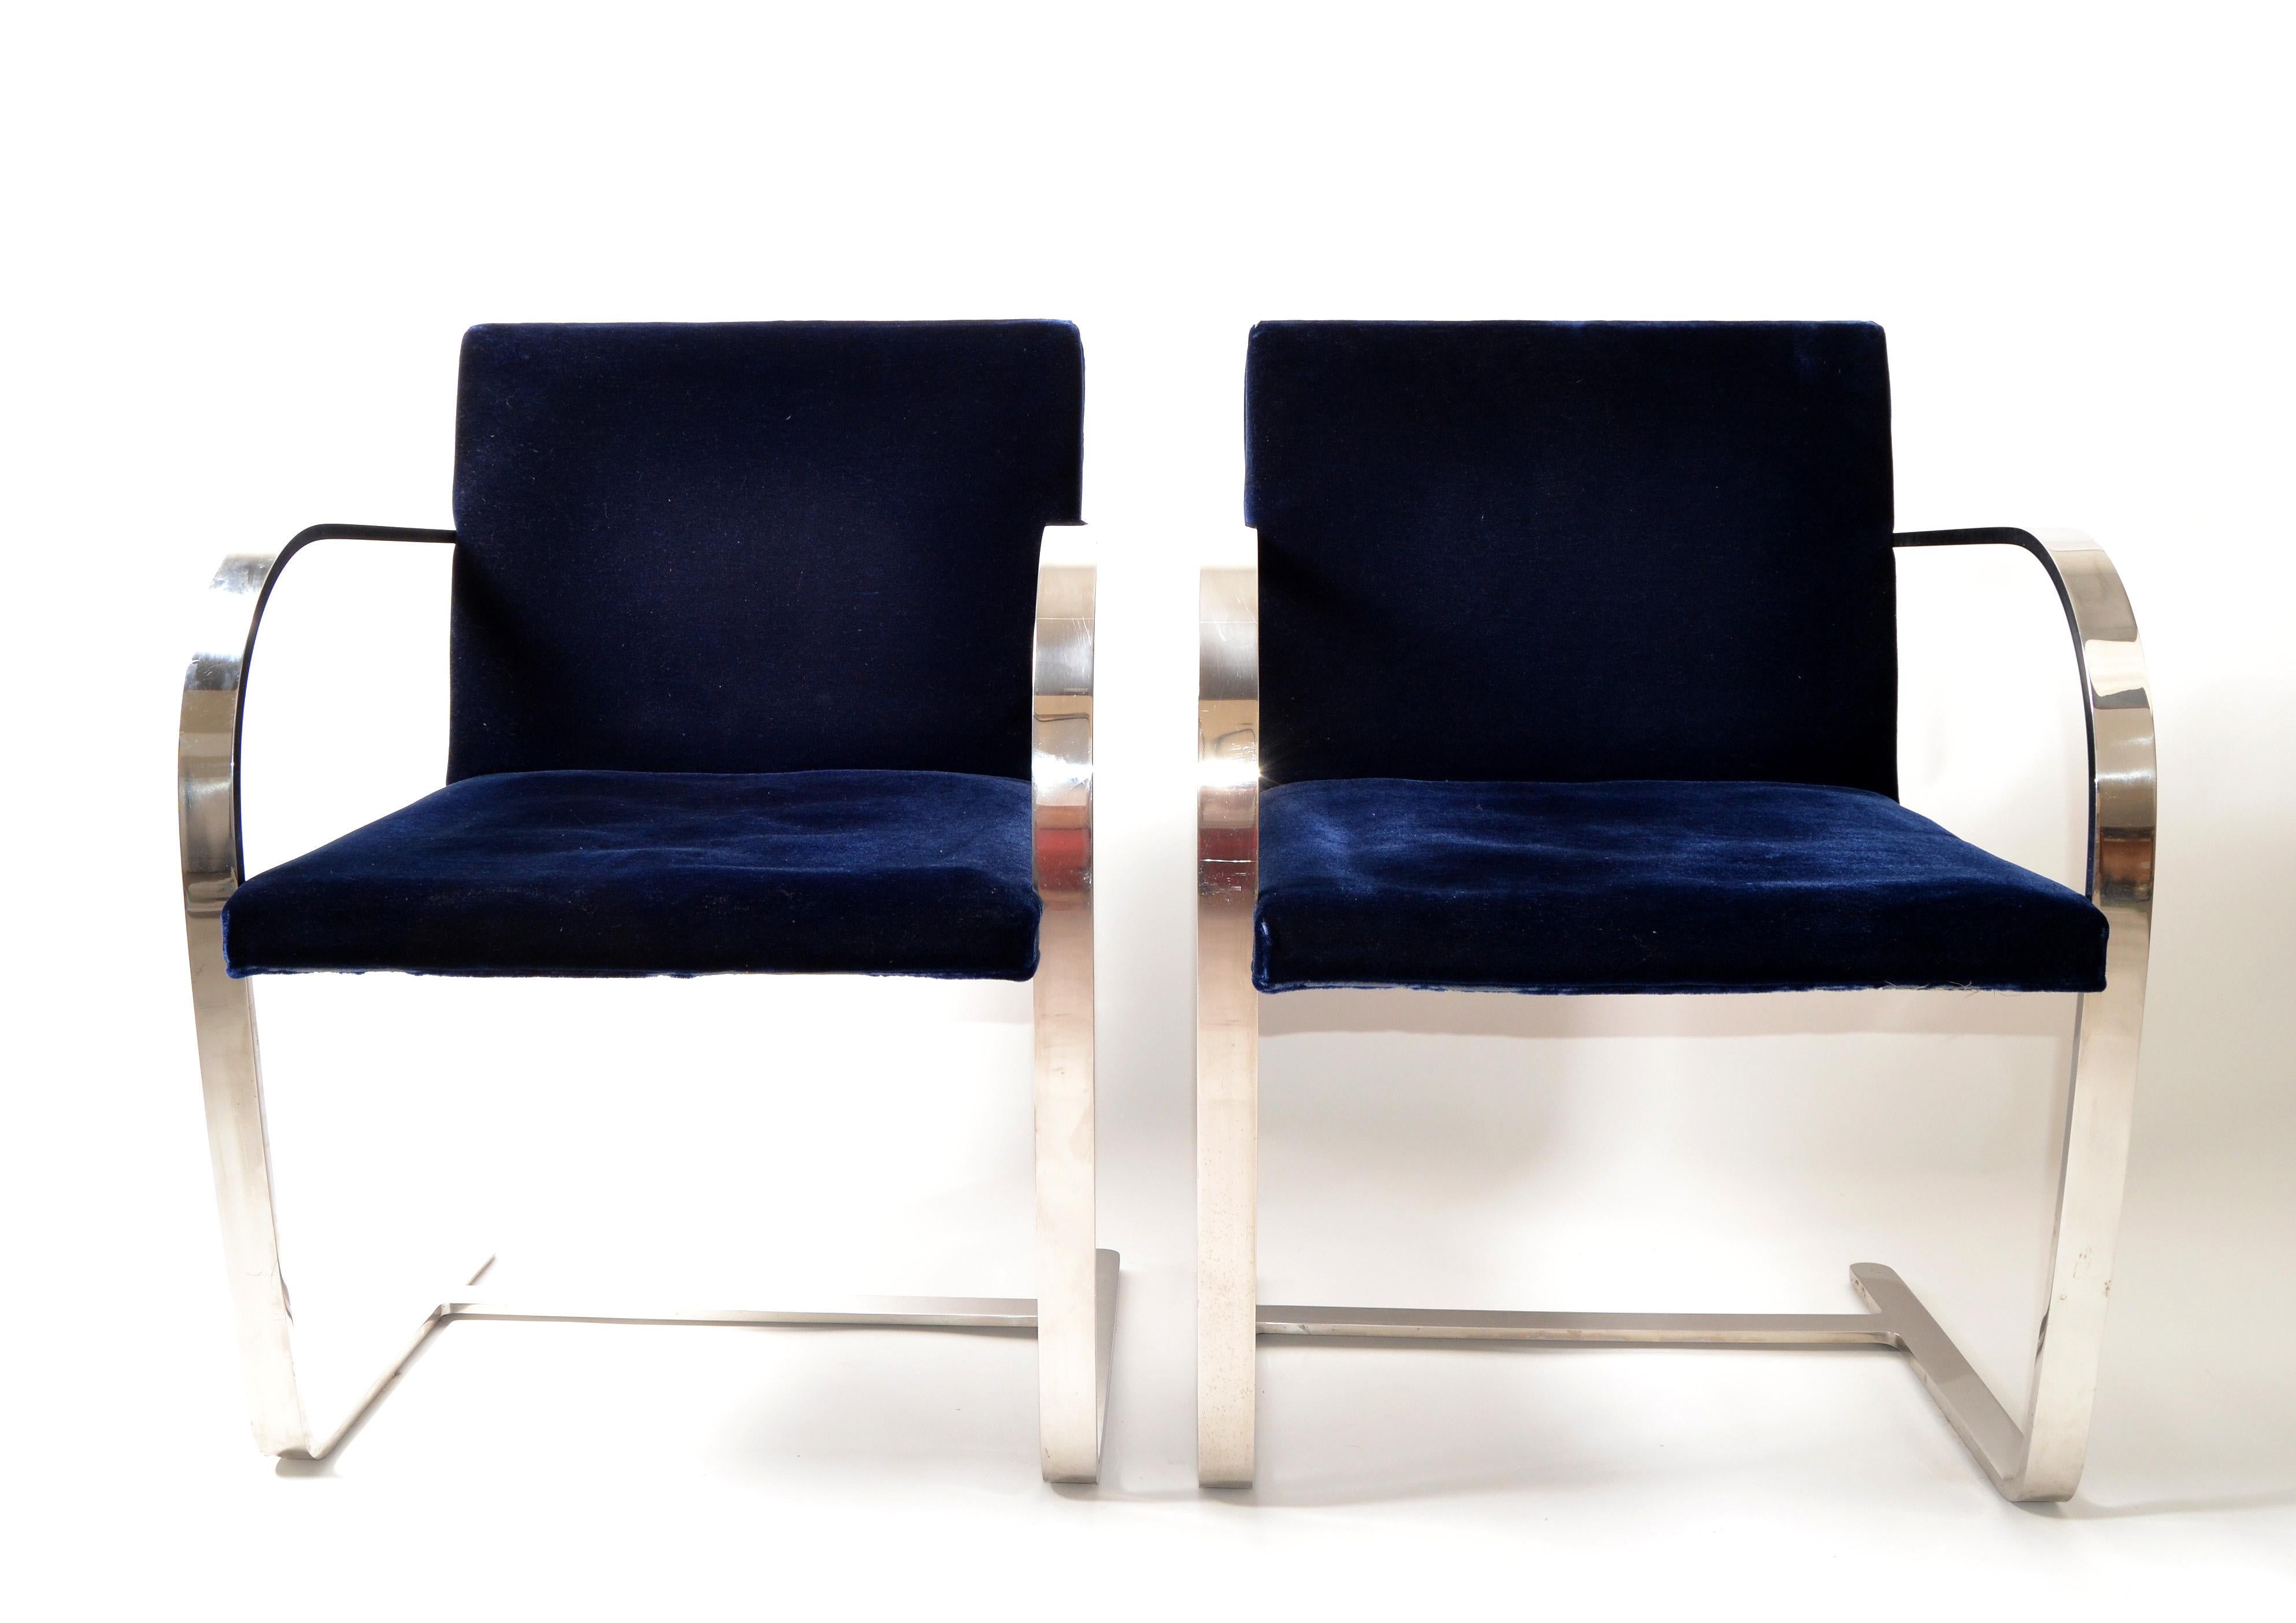 Pair of Mid-Century Modern Mies van der Rohe flatbar Brno for Knoll in stainless steel with the original navy blue velvet Fabric.
In very good condition marked with label, Knoll International made in year 1977.
I also have a pair in dark red